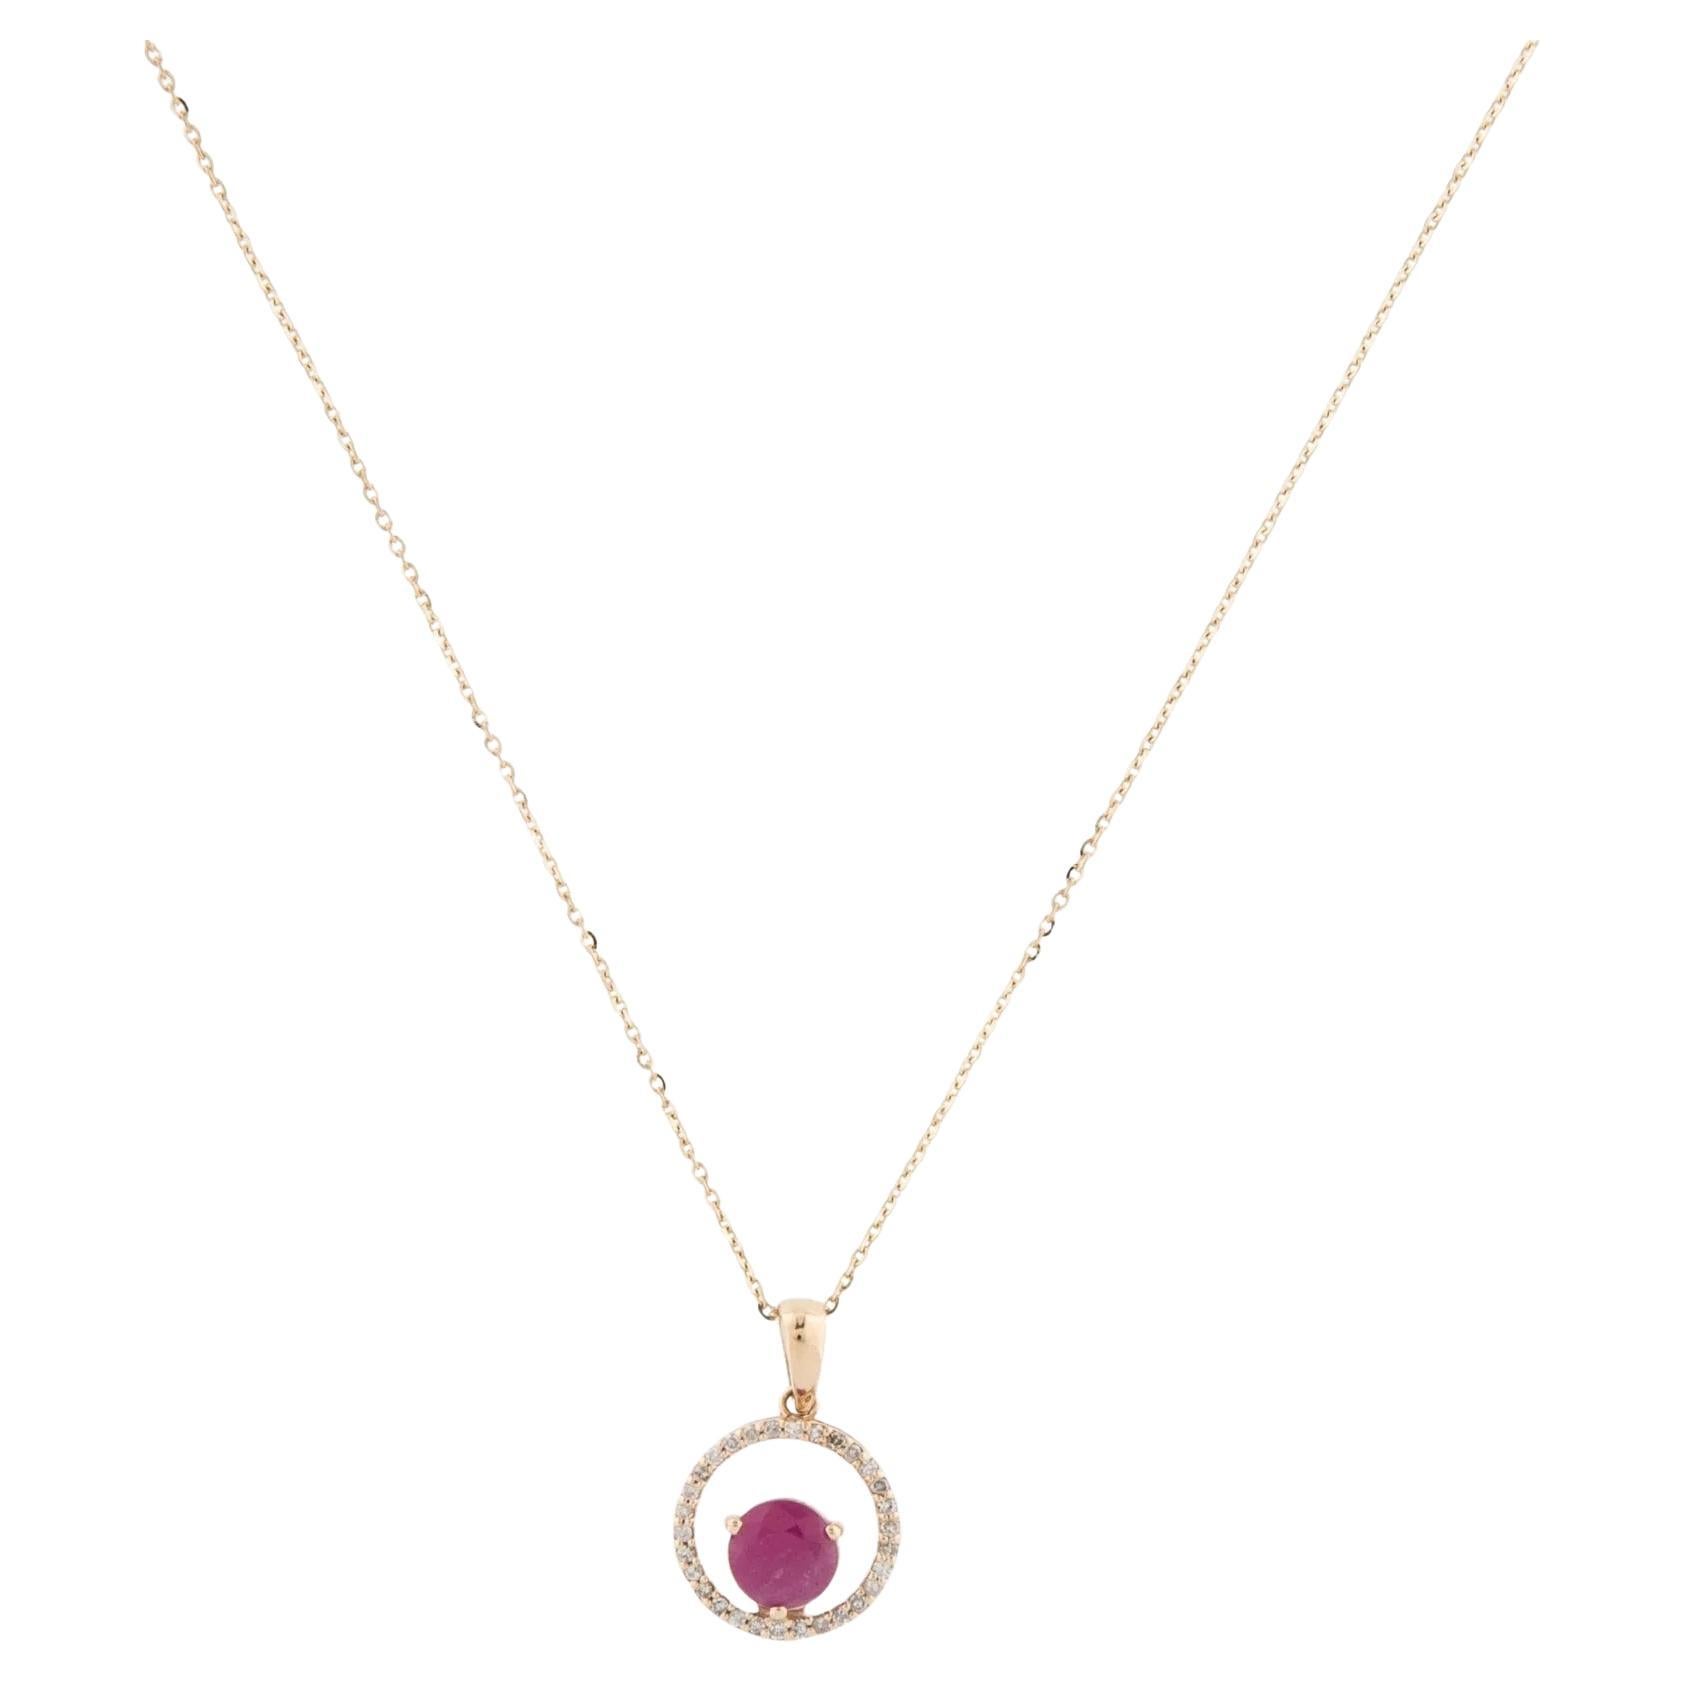 14K Ruby & Diamond Pendant Necklace  Yellow Gold  Round Ruby  0.86ct  Near C For Sale